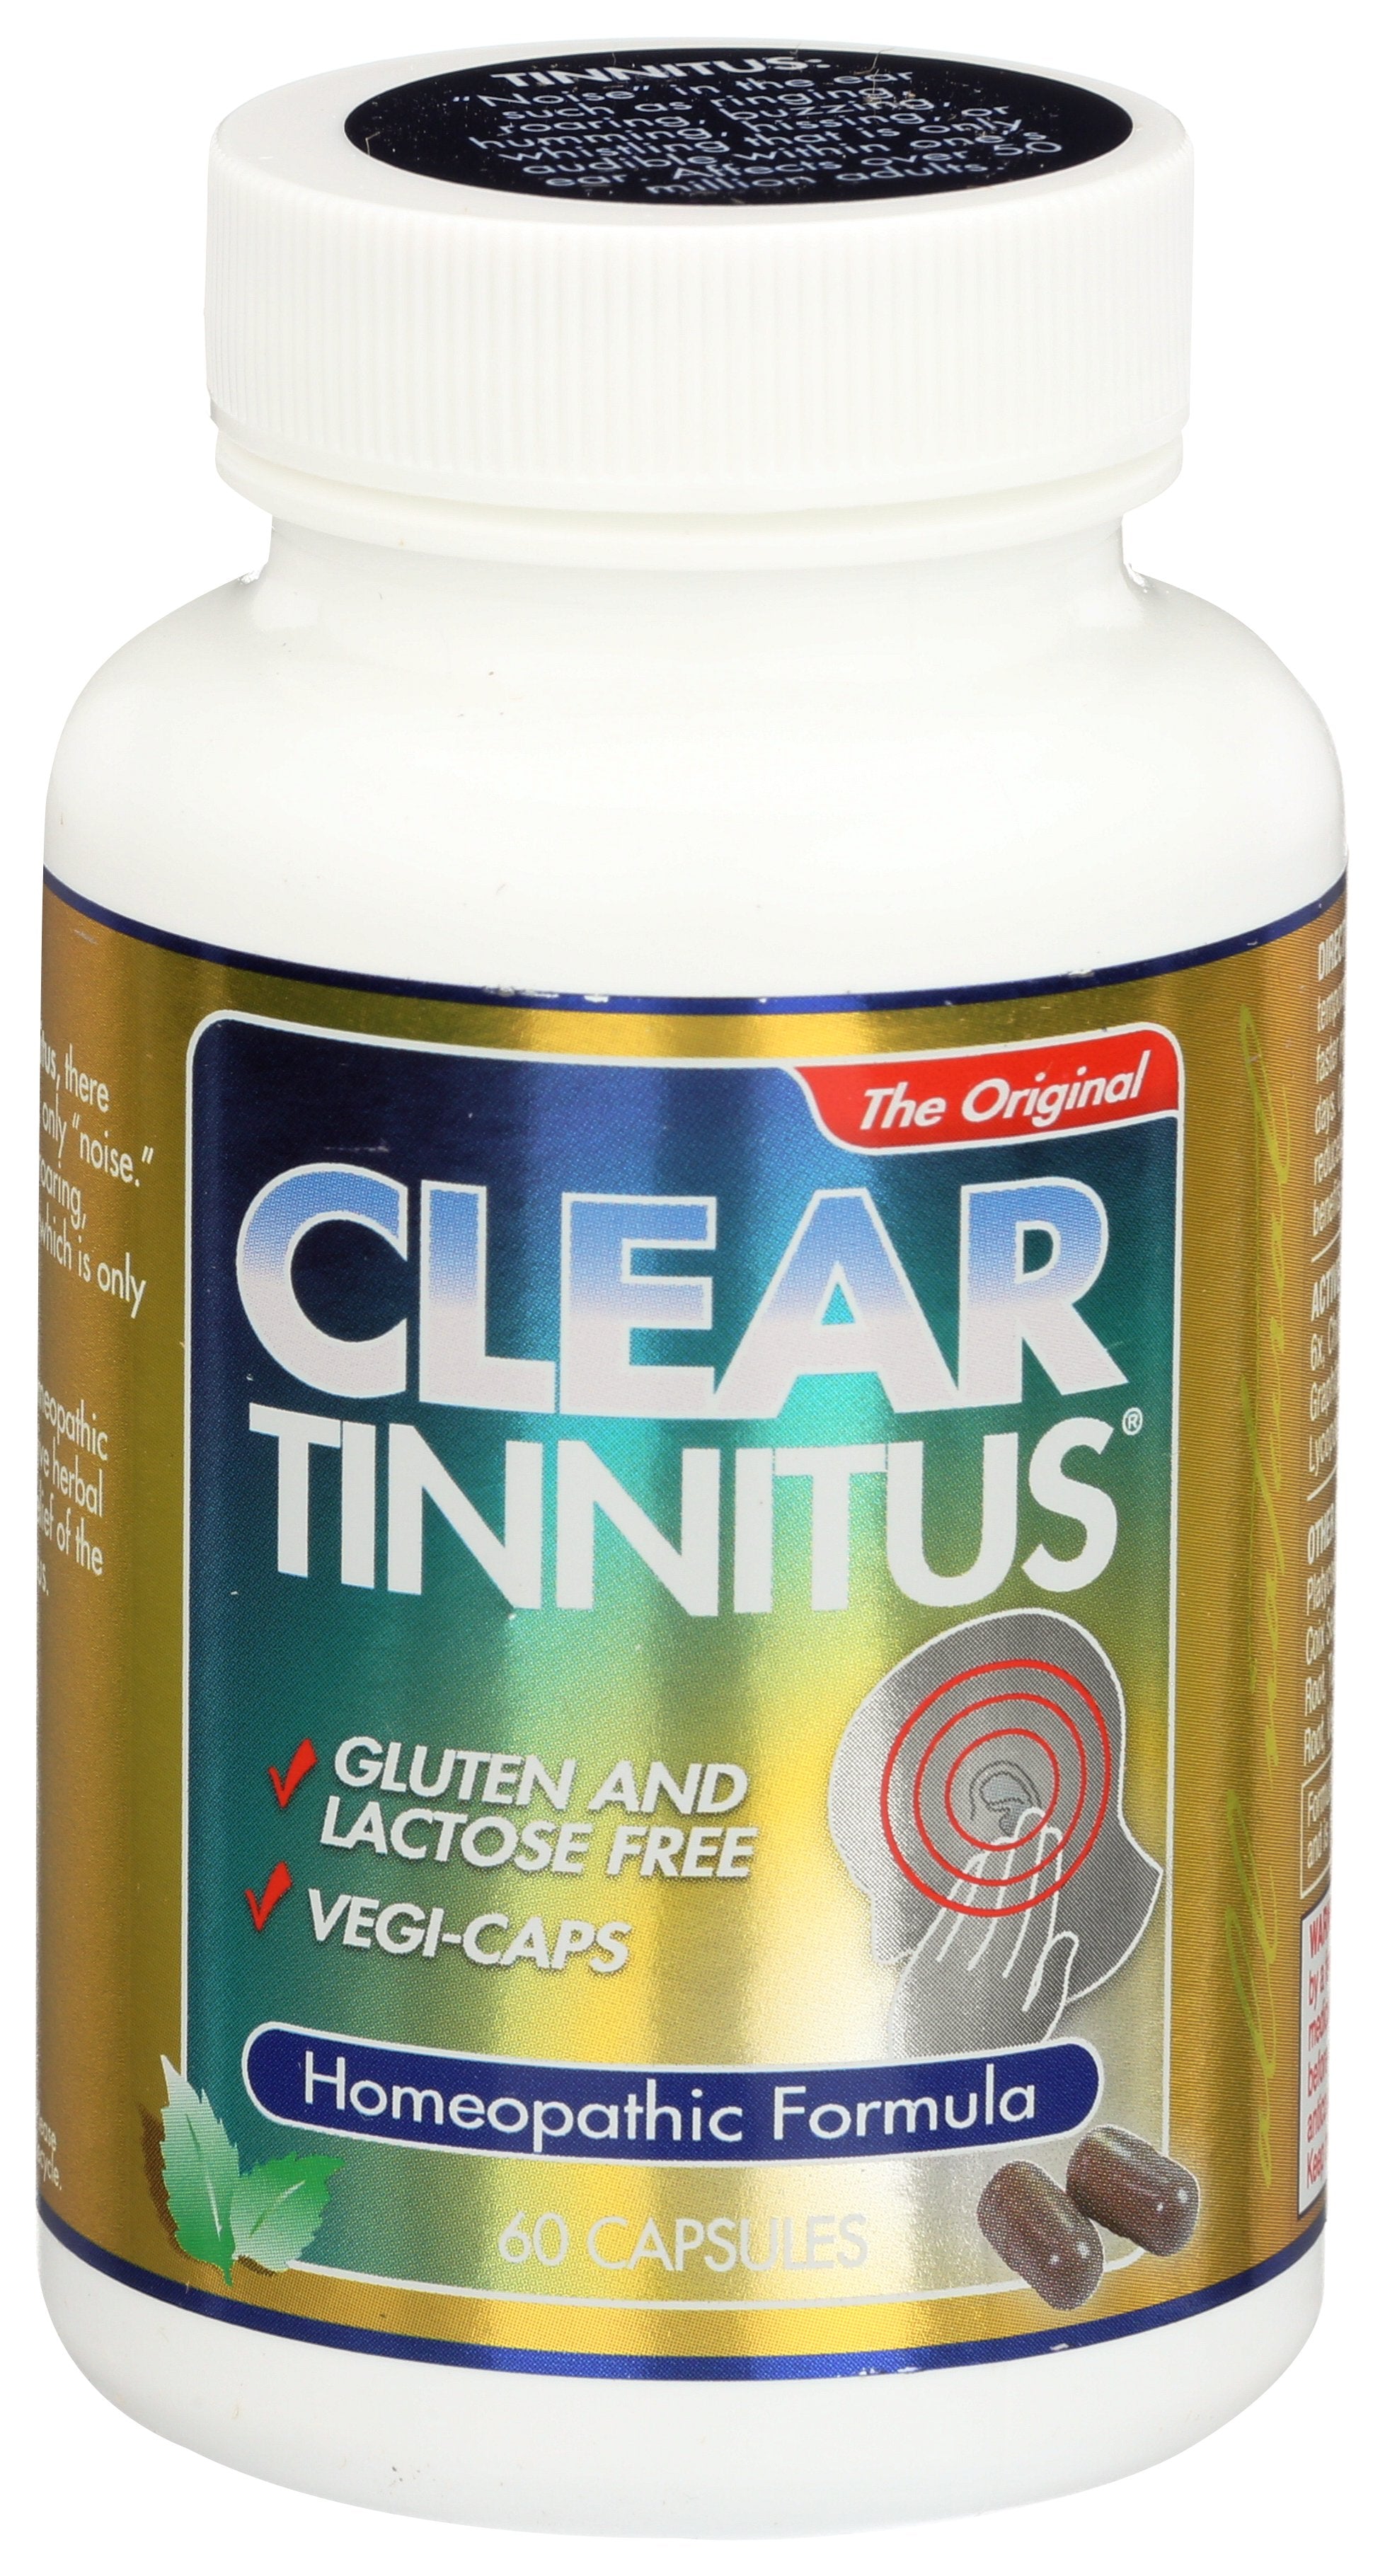 CLEAR PRODUCTS CLEAR TINNITUS - Case of 3